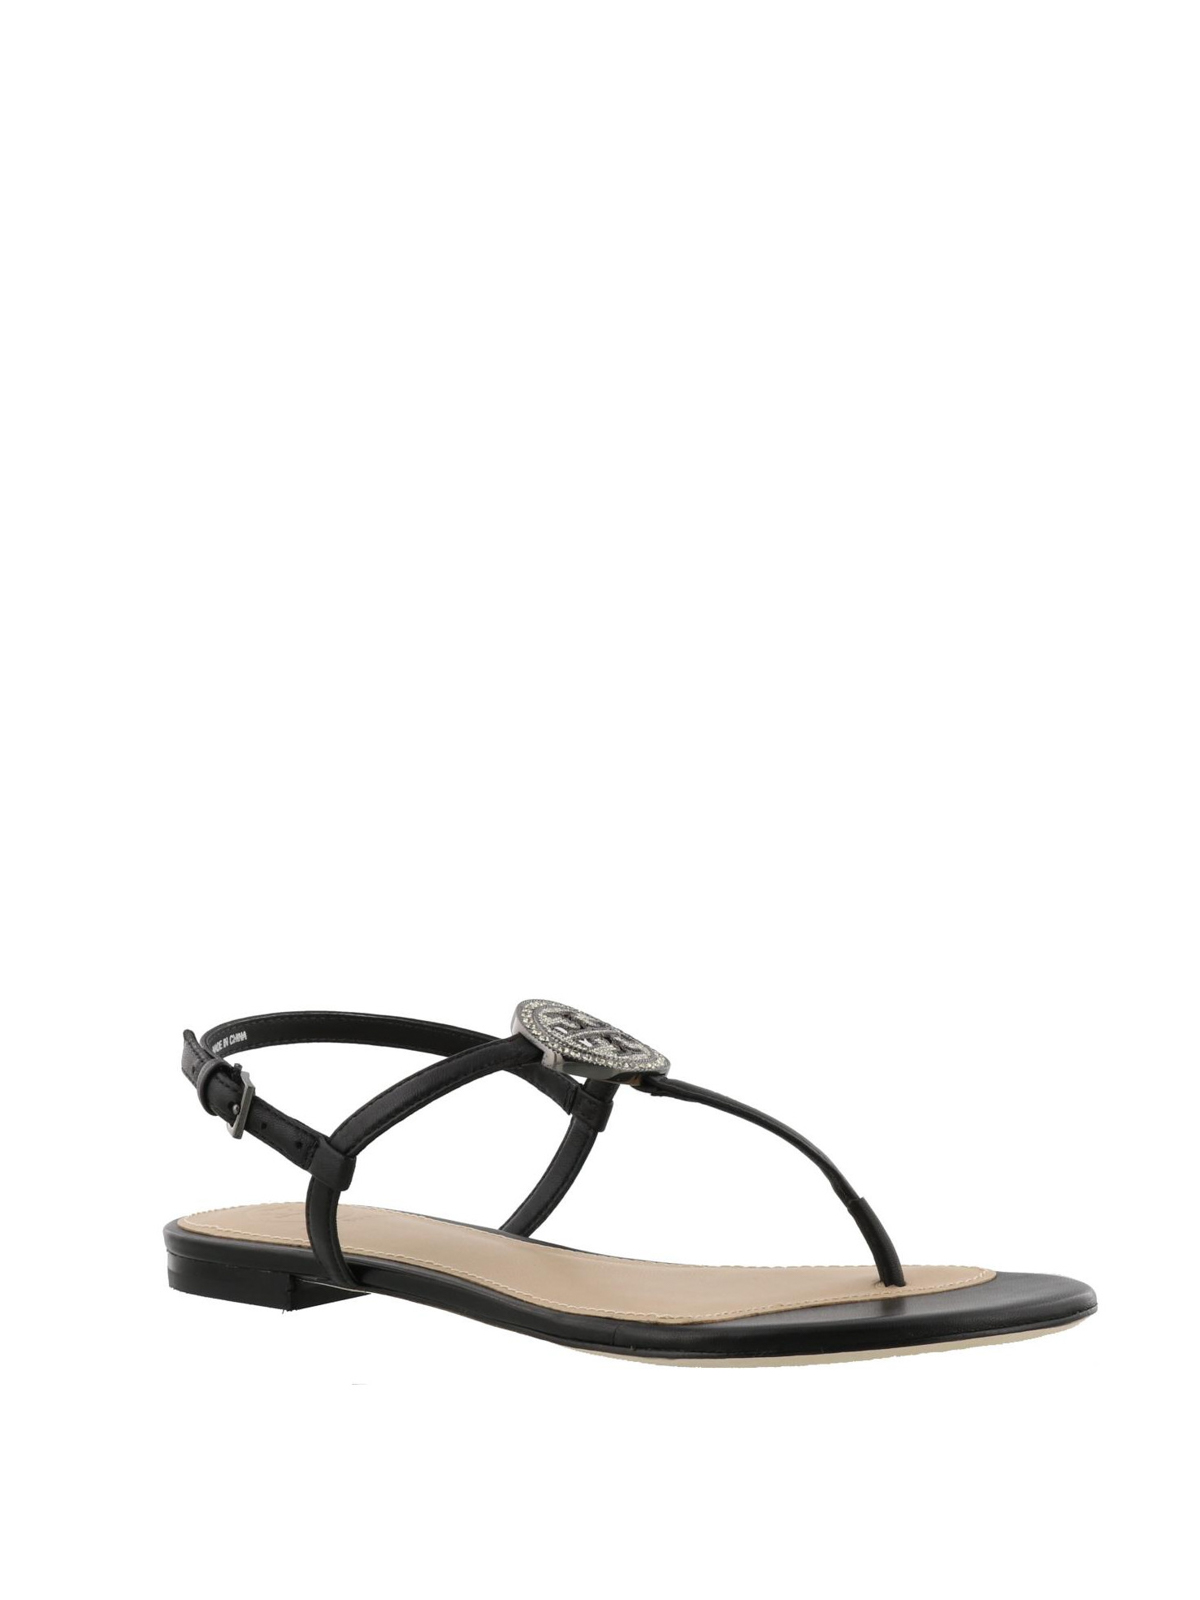 Sandals Tory Burch - Liana black leather thong sandals - 46086001